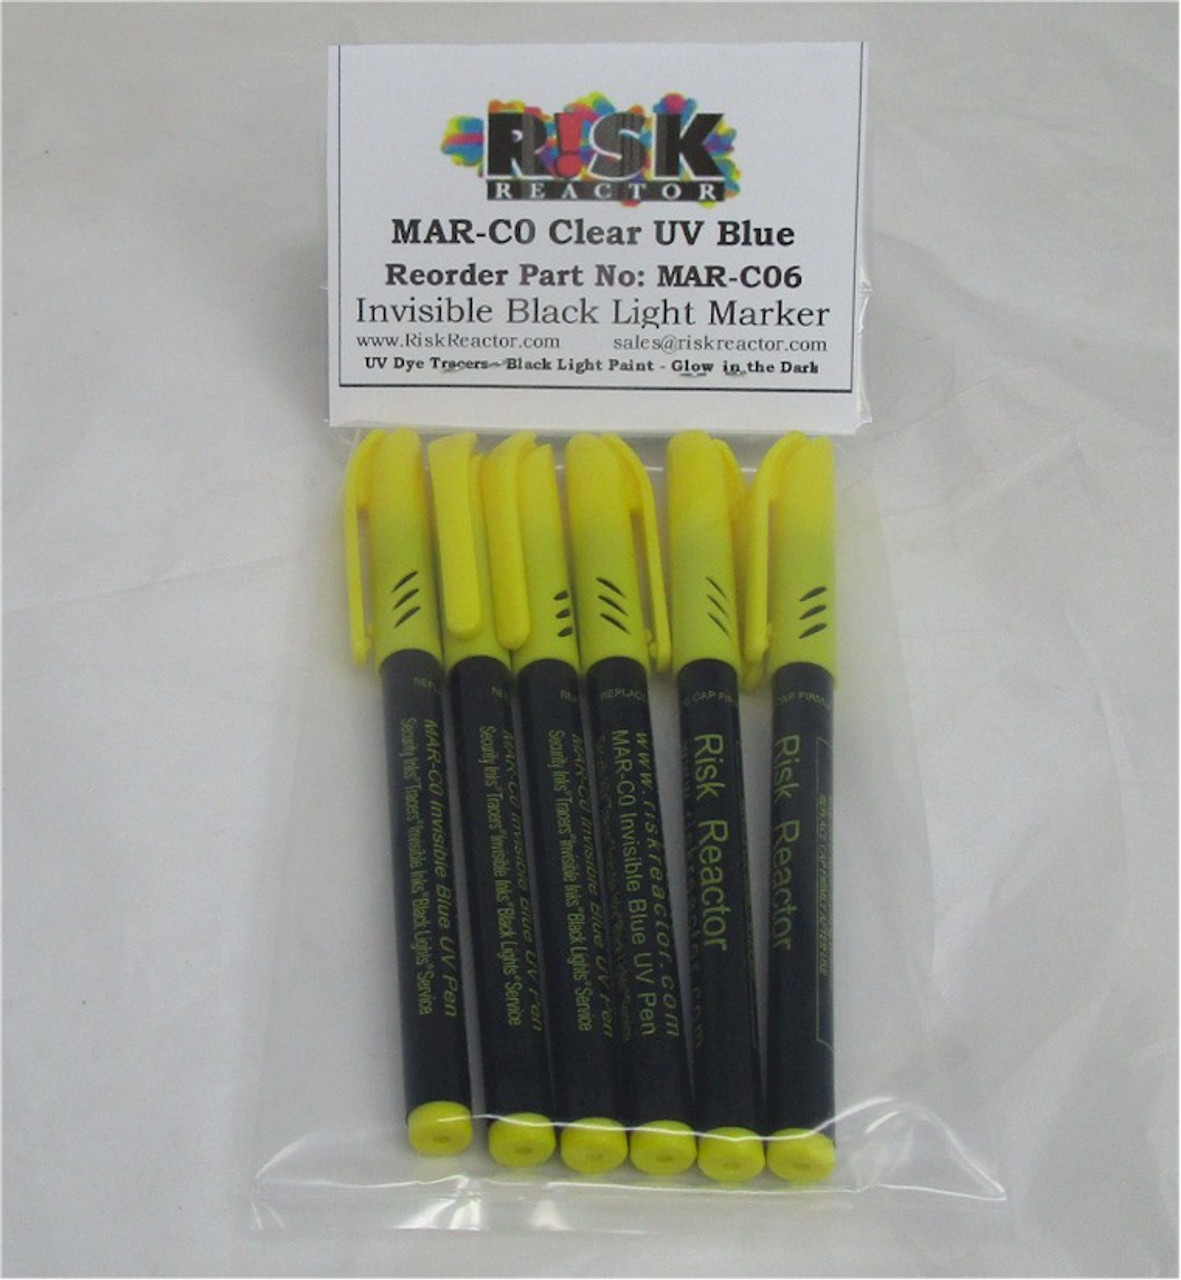 Bag of Six Units of UV Invisible MAR-C06 Security Marking Pen